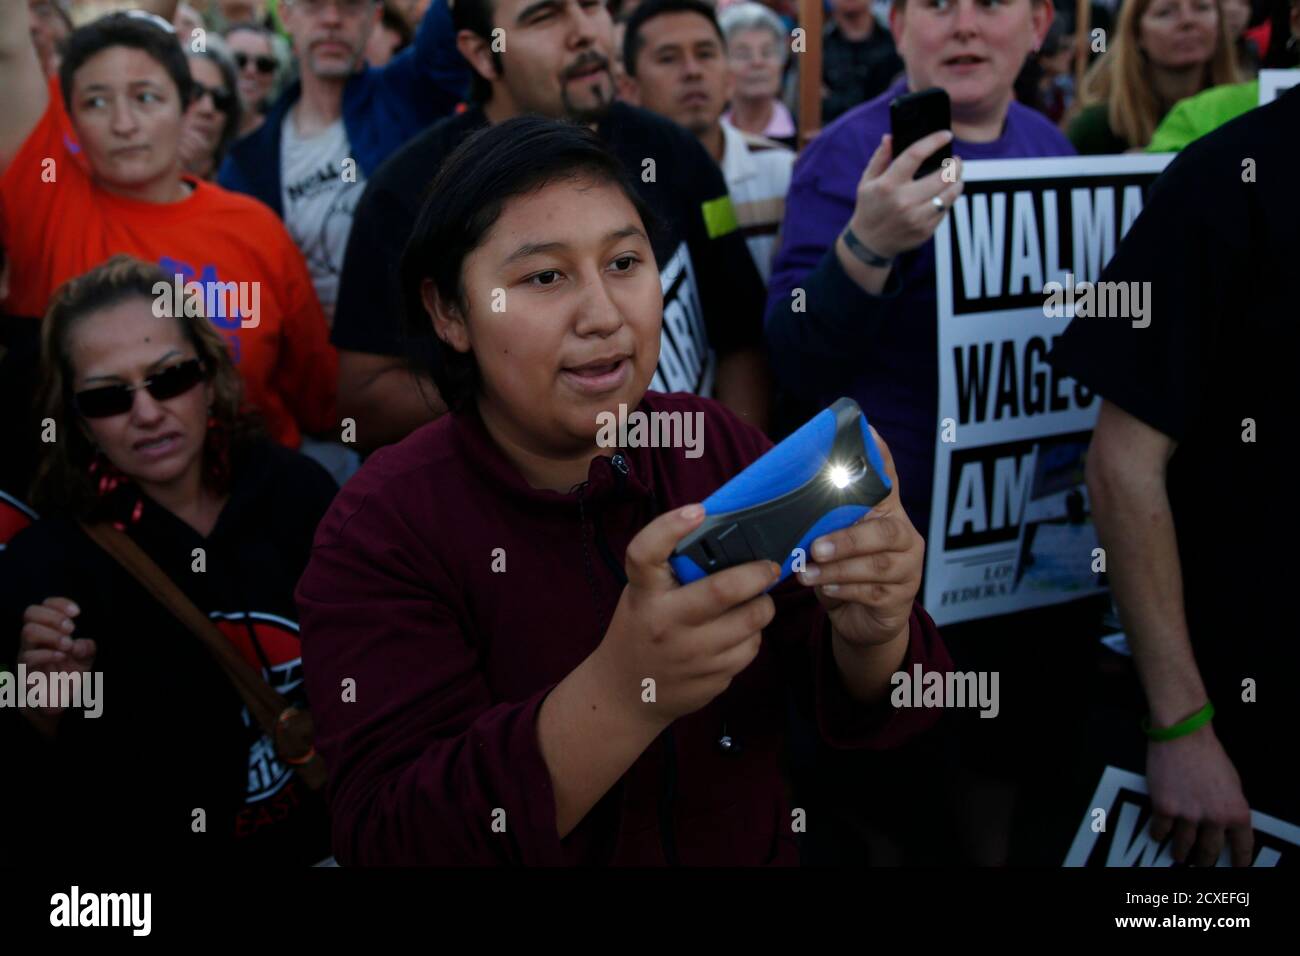 A demonstrator uses her phone as a group of protesters face arrest for civil disobedience outside Wal-Mart, during a demonstration for better wages and working conditions during Black Friday in San Leandro, California November 29, 2013. Black Friday, the day following the Thanksgiving Day holiday, has traditionally been the busiest shopping day in the United States. REUTERS/Stephen Lam (UNITED STATES - Tags: BUSINESS CIVIL UNREST) Stock Photo